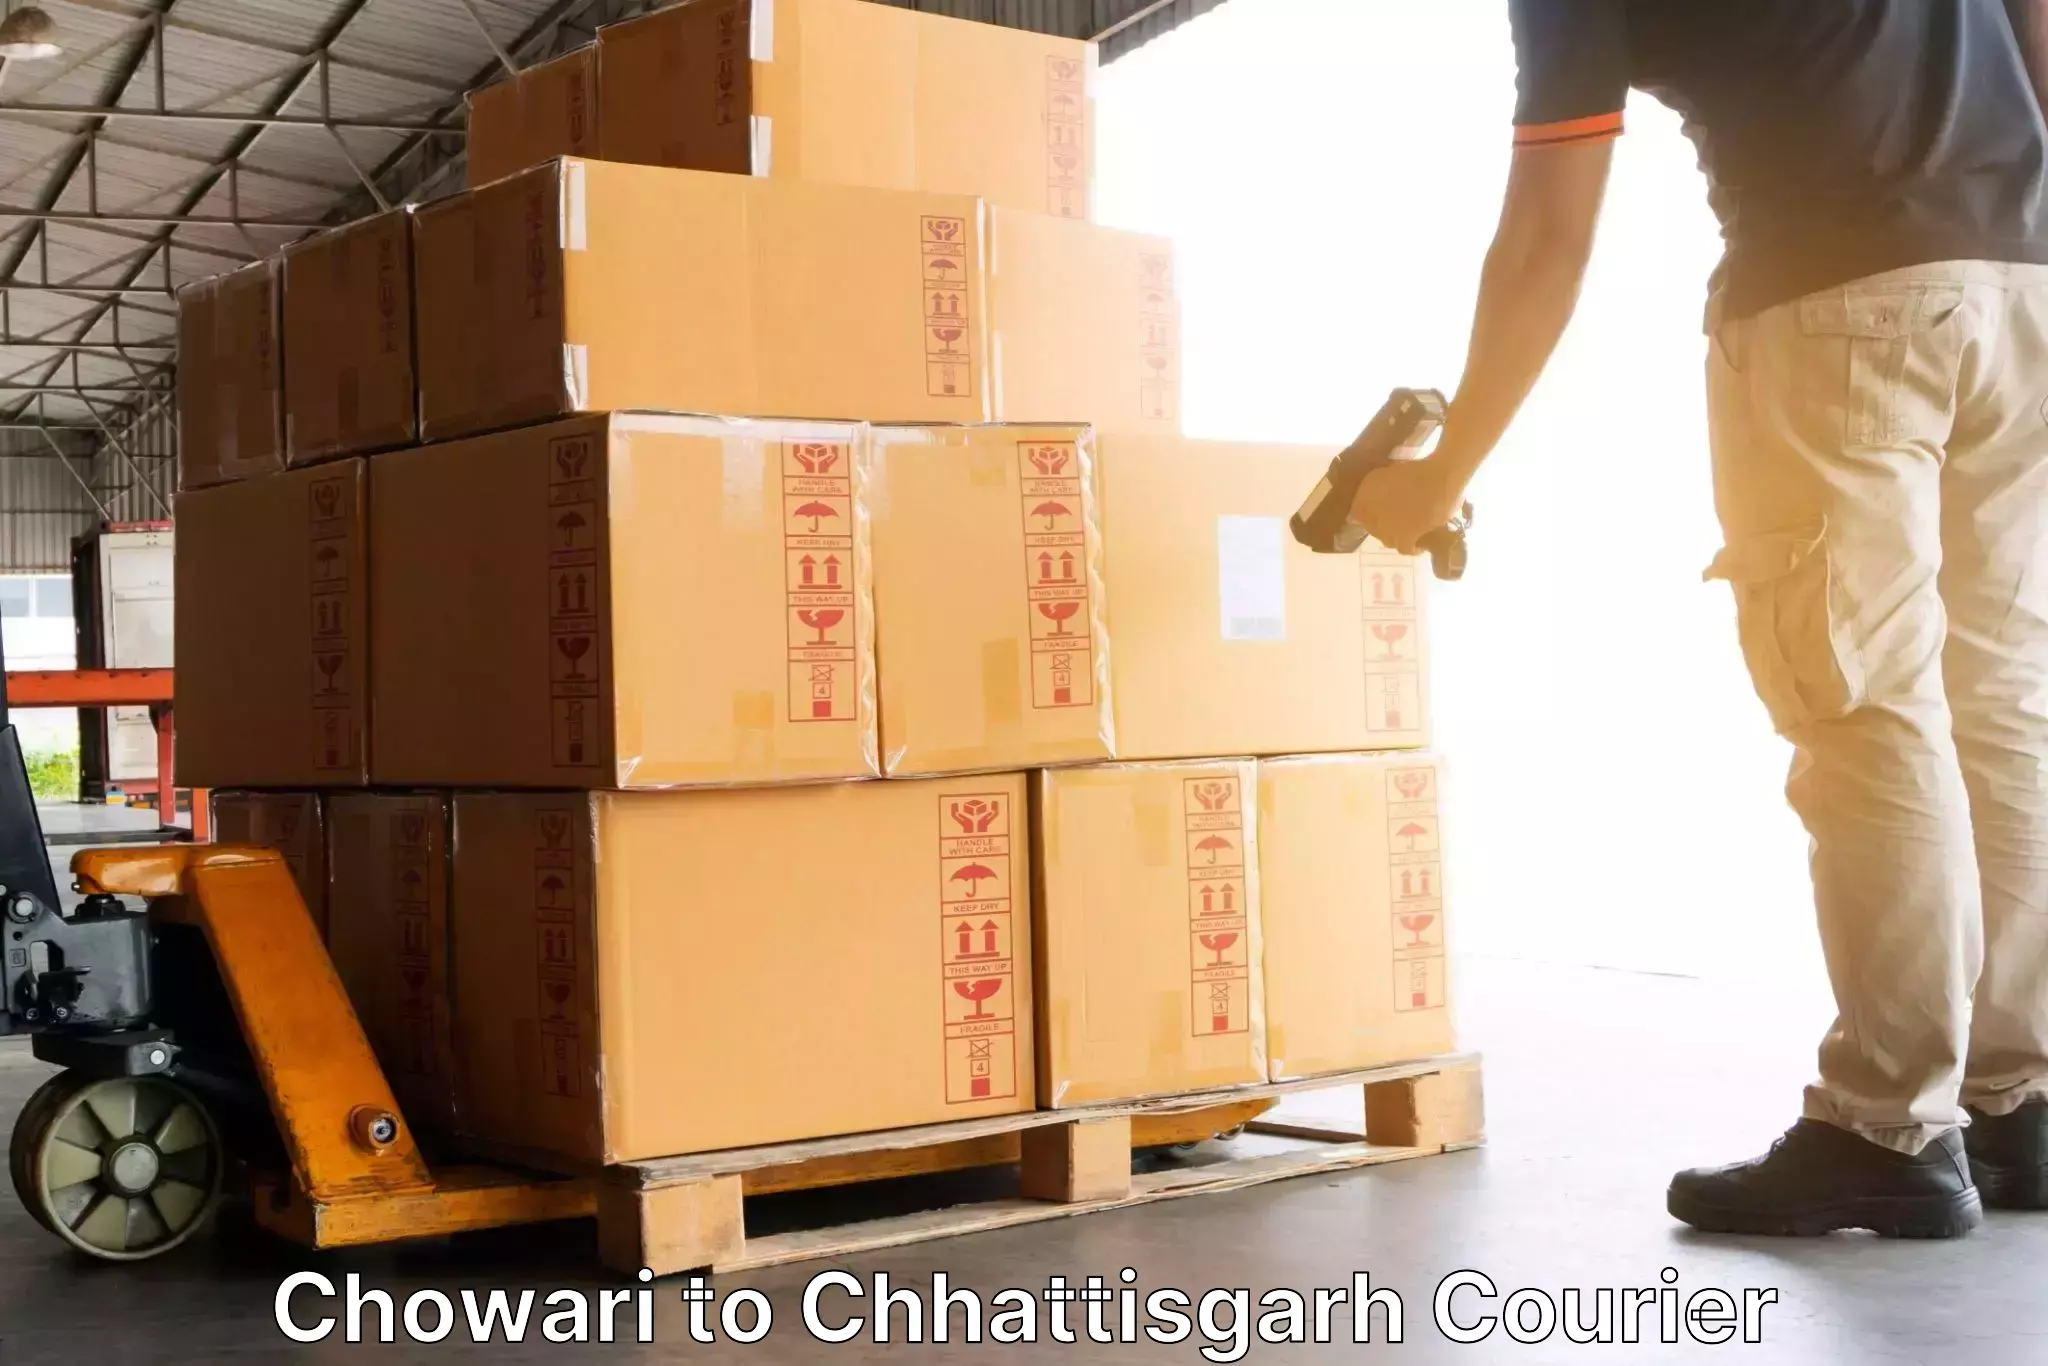 Courier service efficiency Chowari to Surajpur